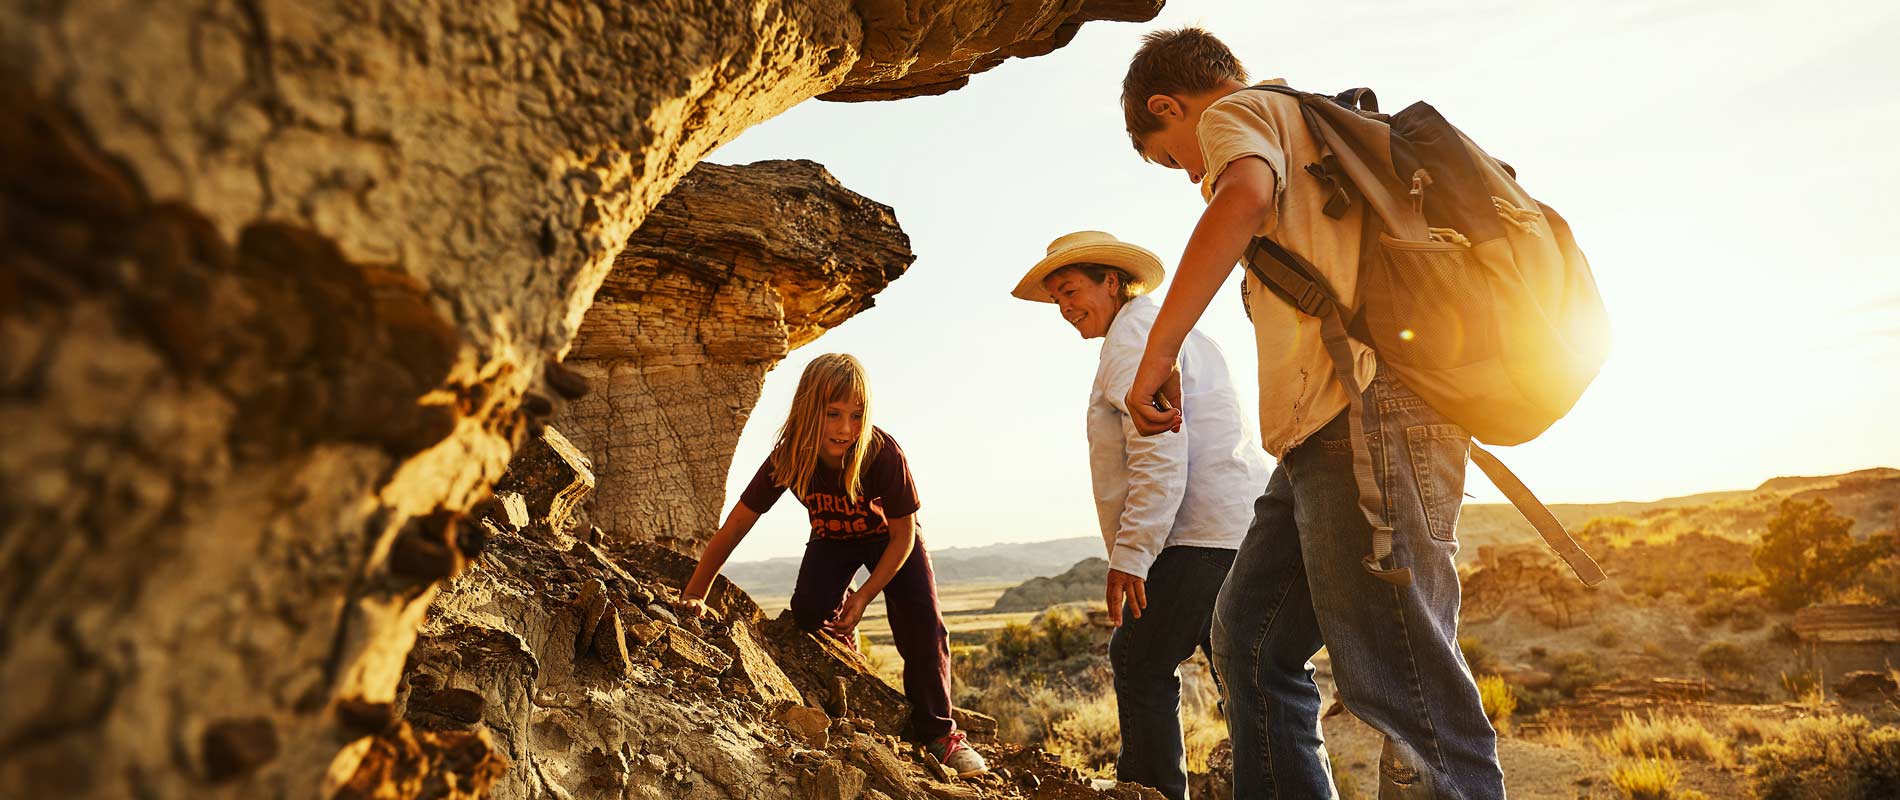 Two kids and adult on rock Baischs Dinosaur Dig